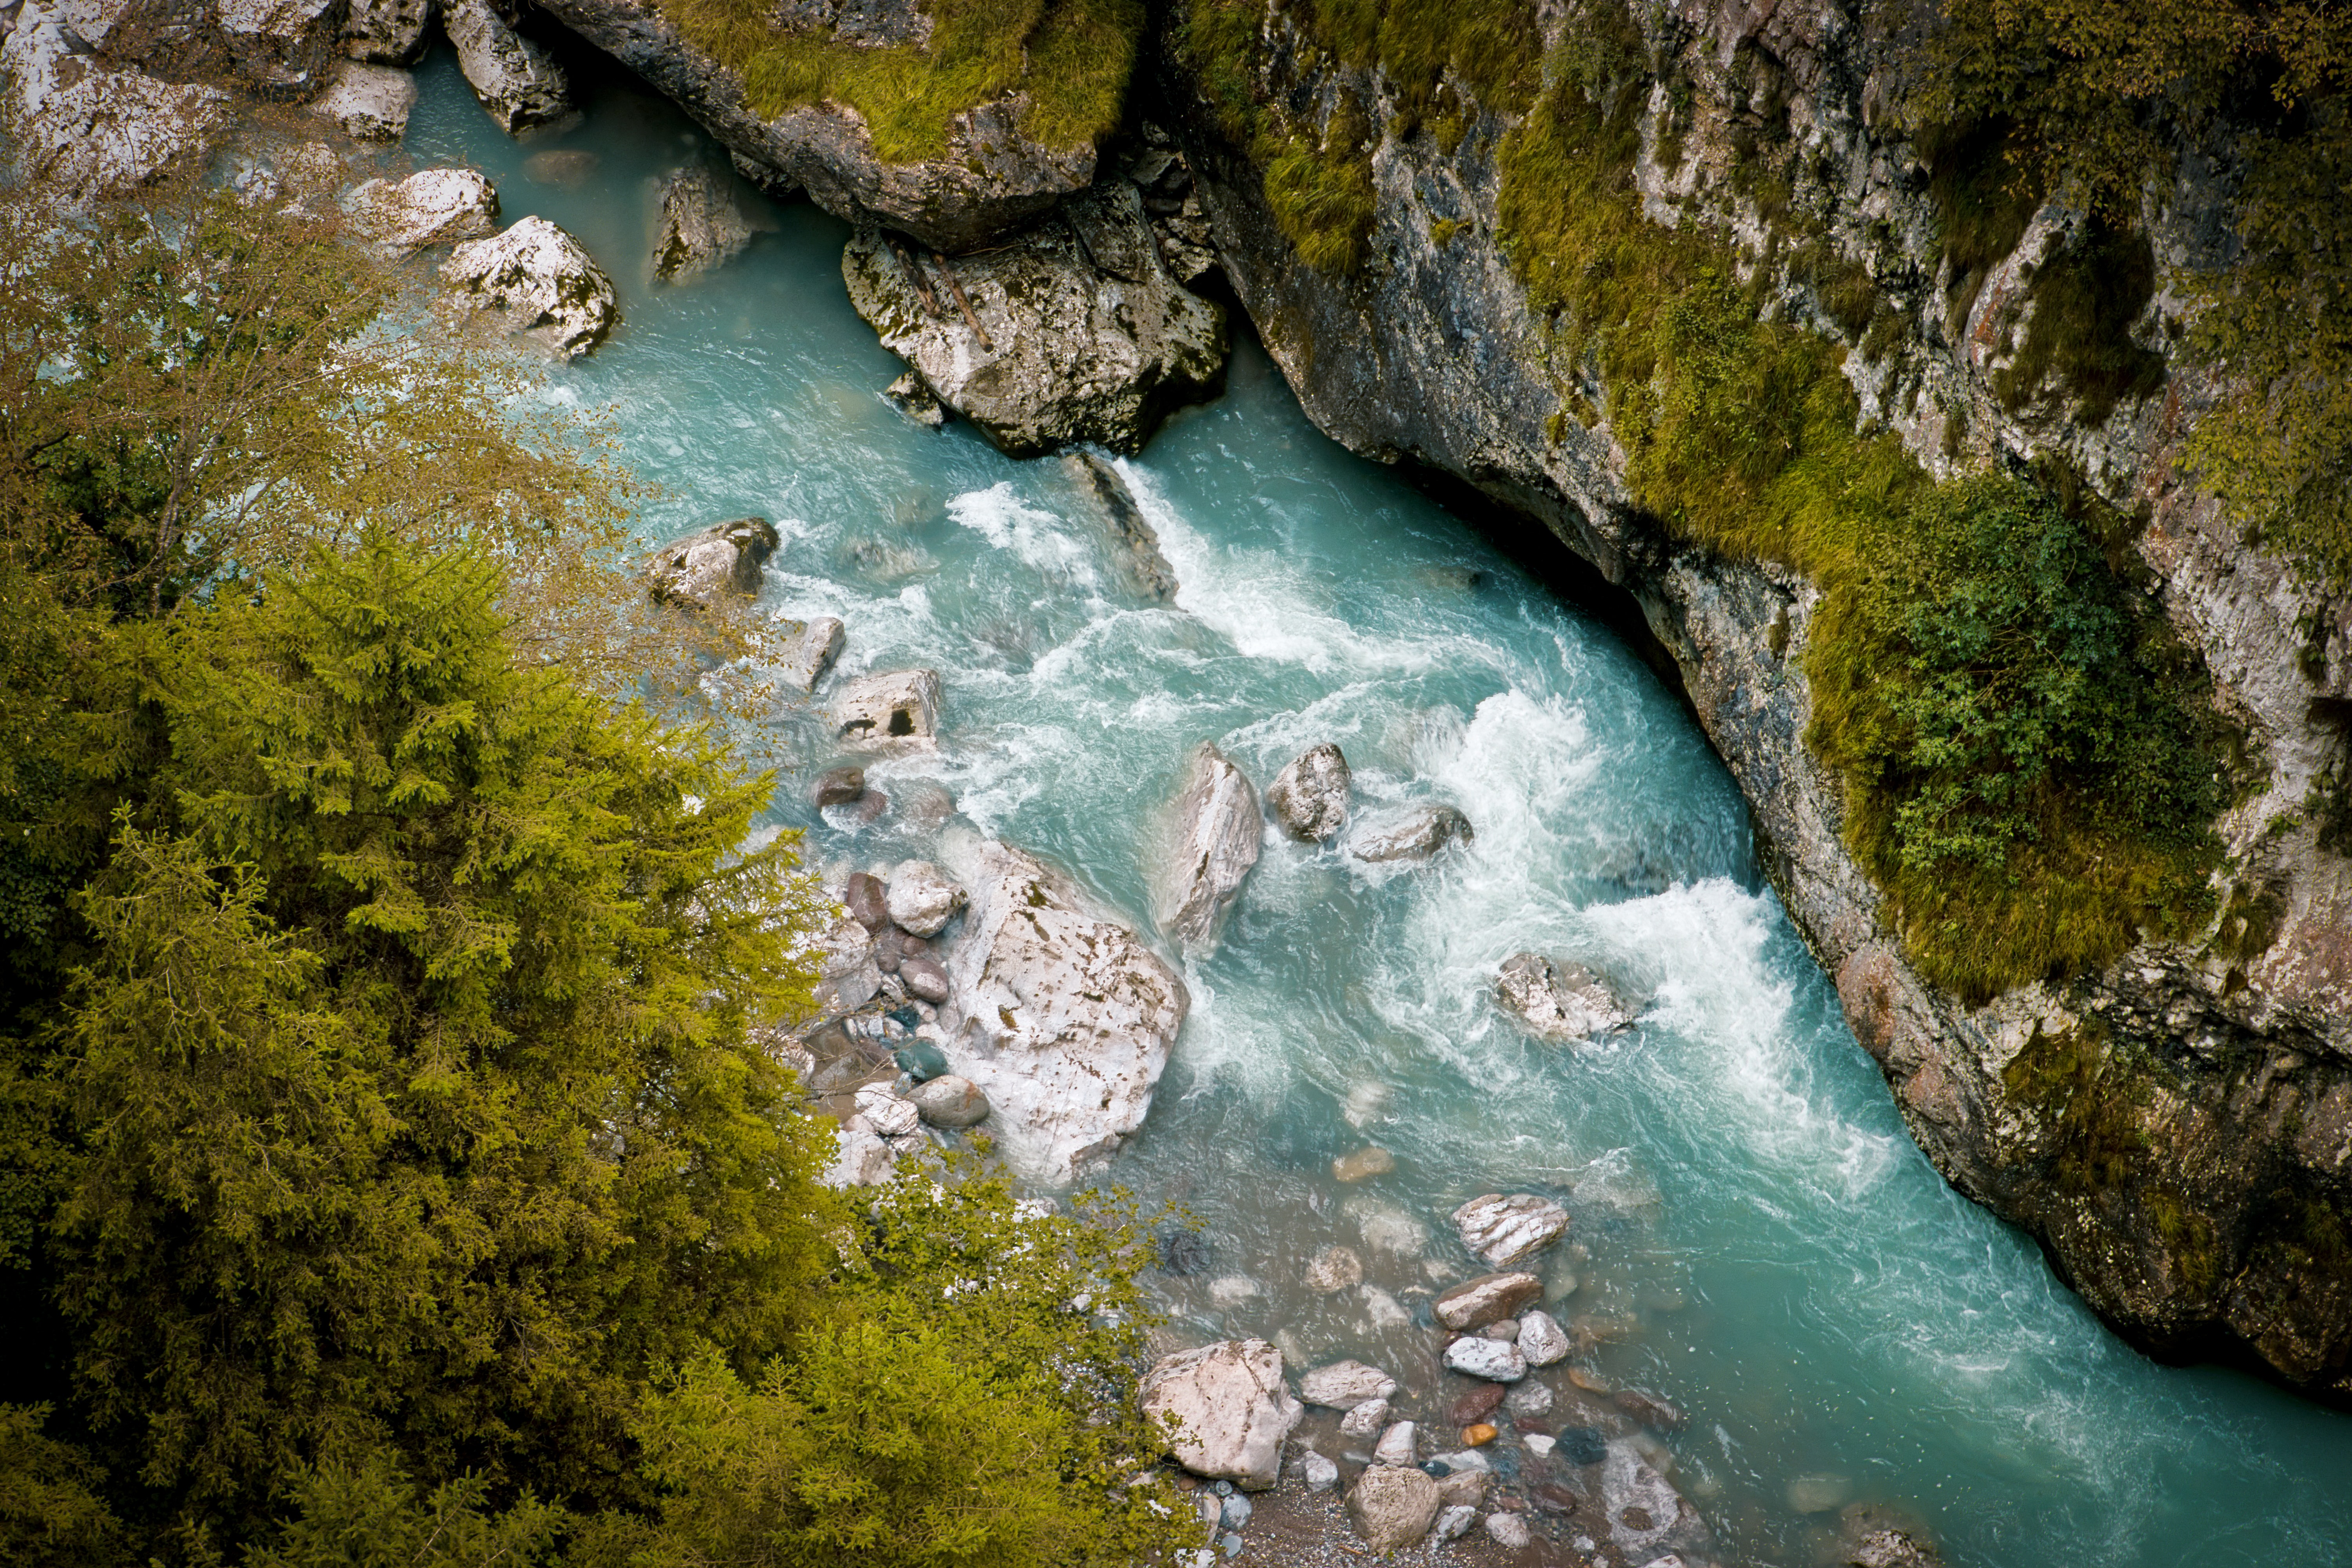 view from above, nature, rivers, trees, rocks